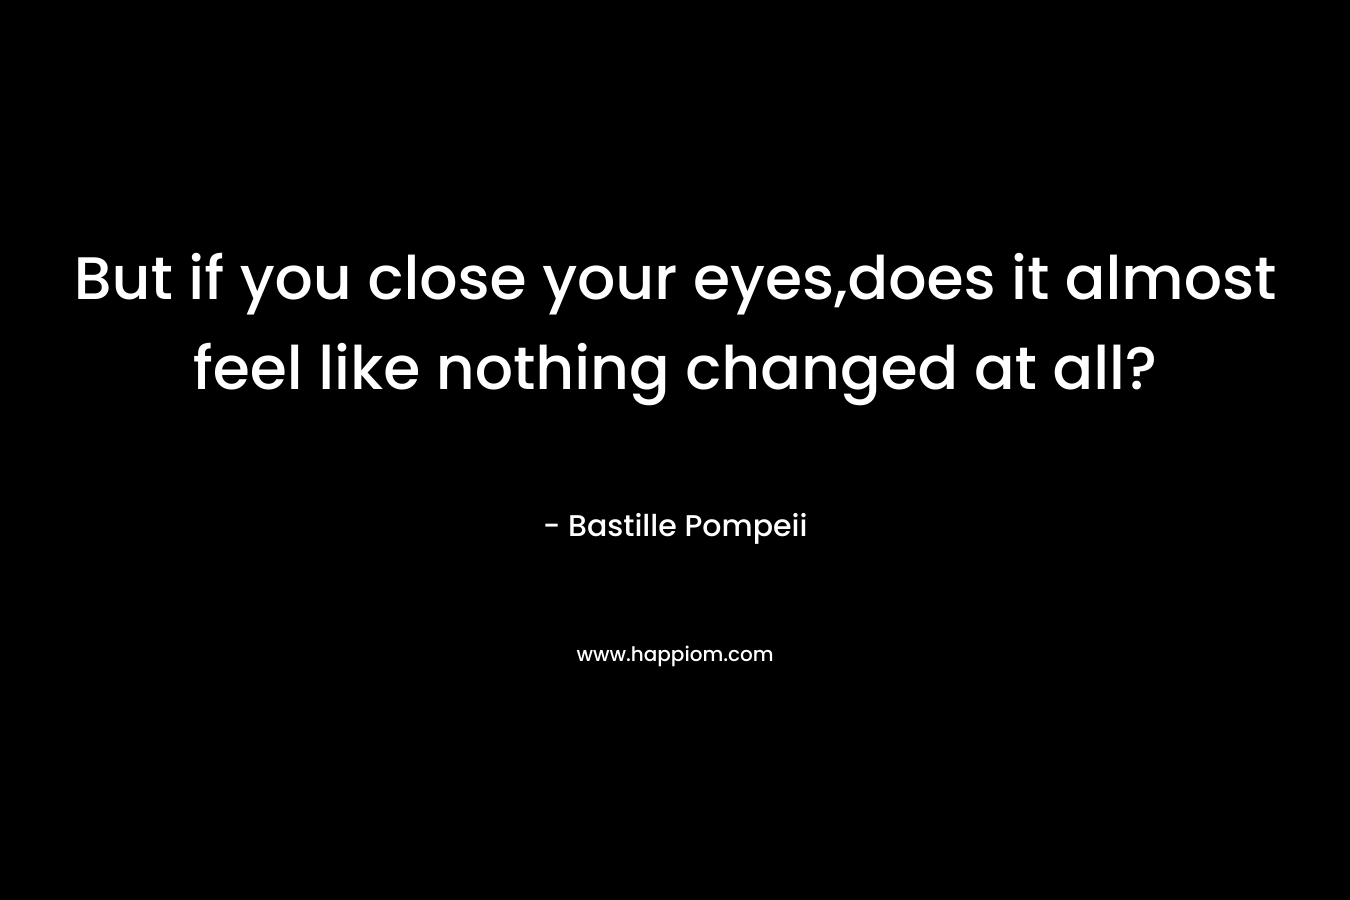 But if you close your eyes,does it almost feel like nothing changed at all? – Bastille Pompeii